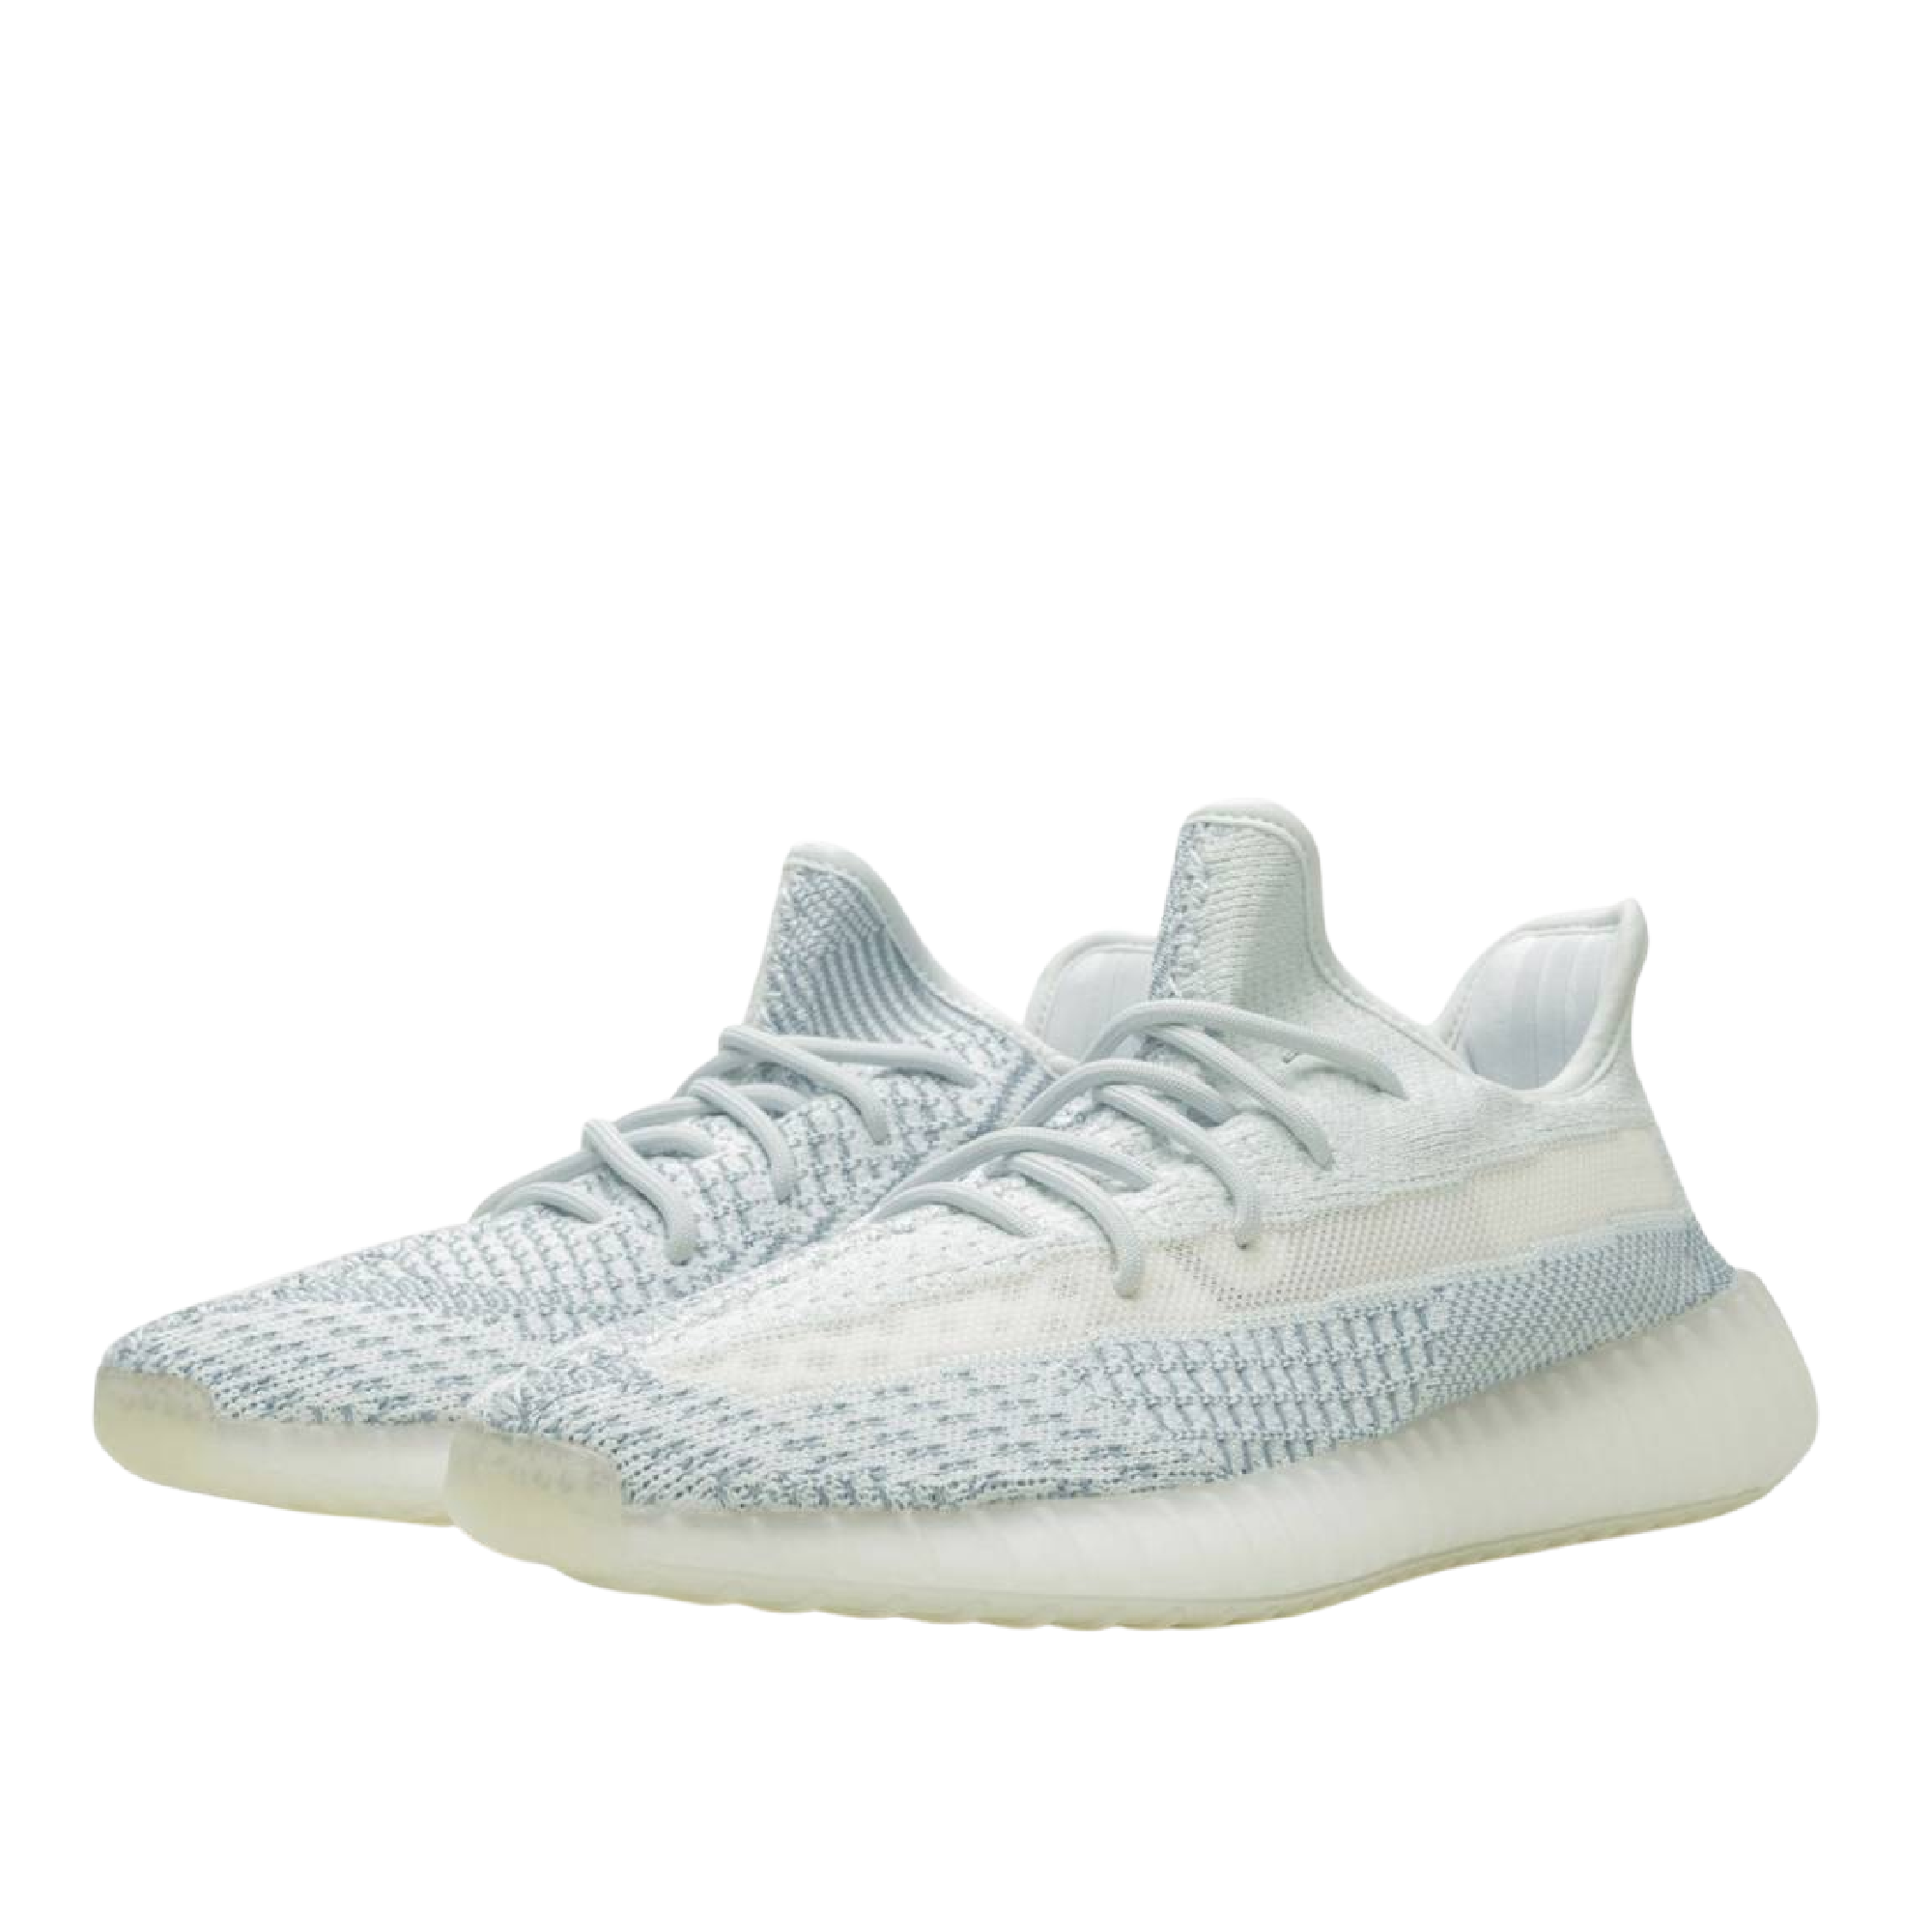 adidas Yeezy Boost 350 V2 Cloud White (Reflective) - Sole Premise